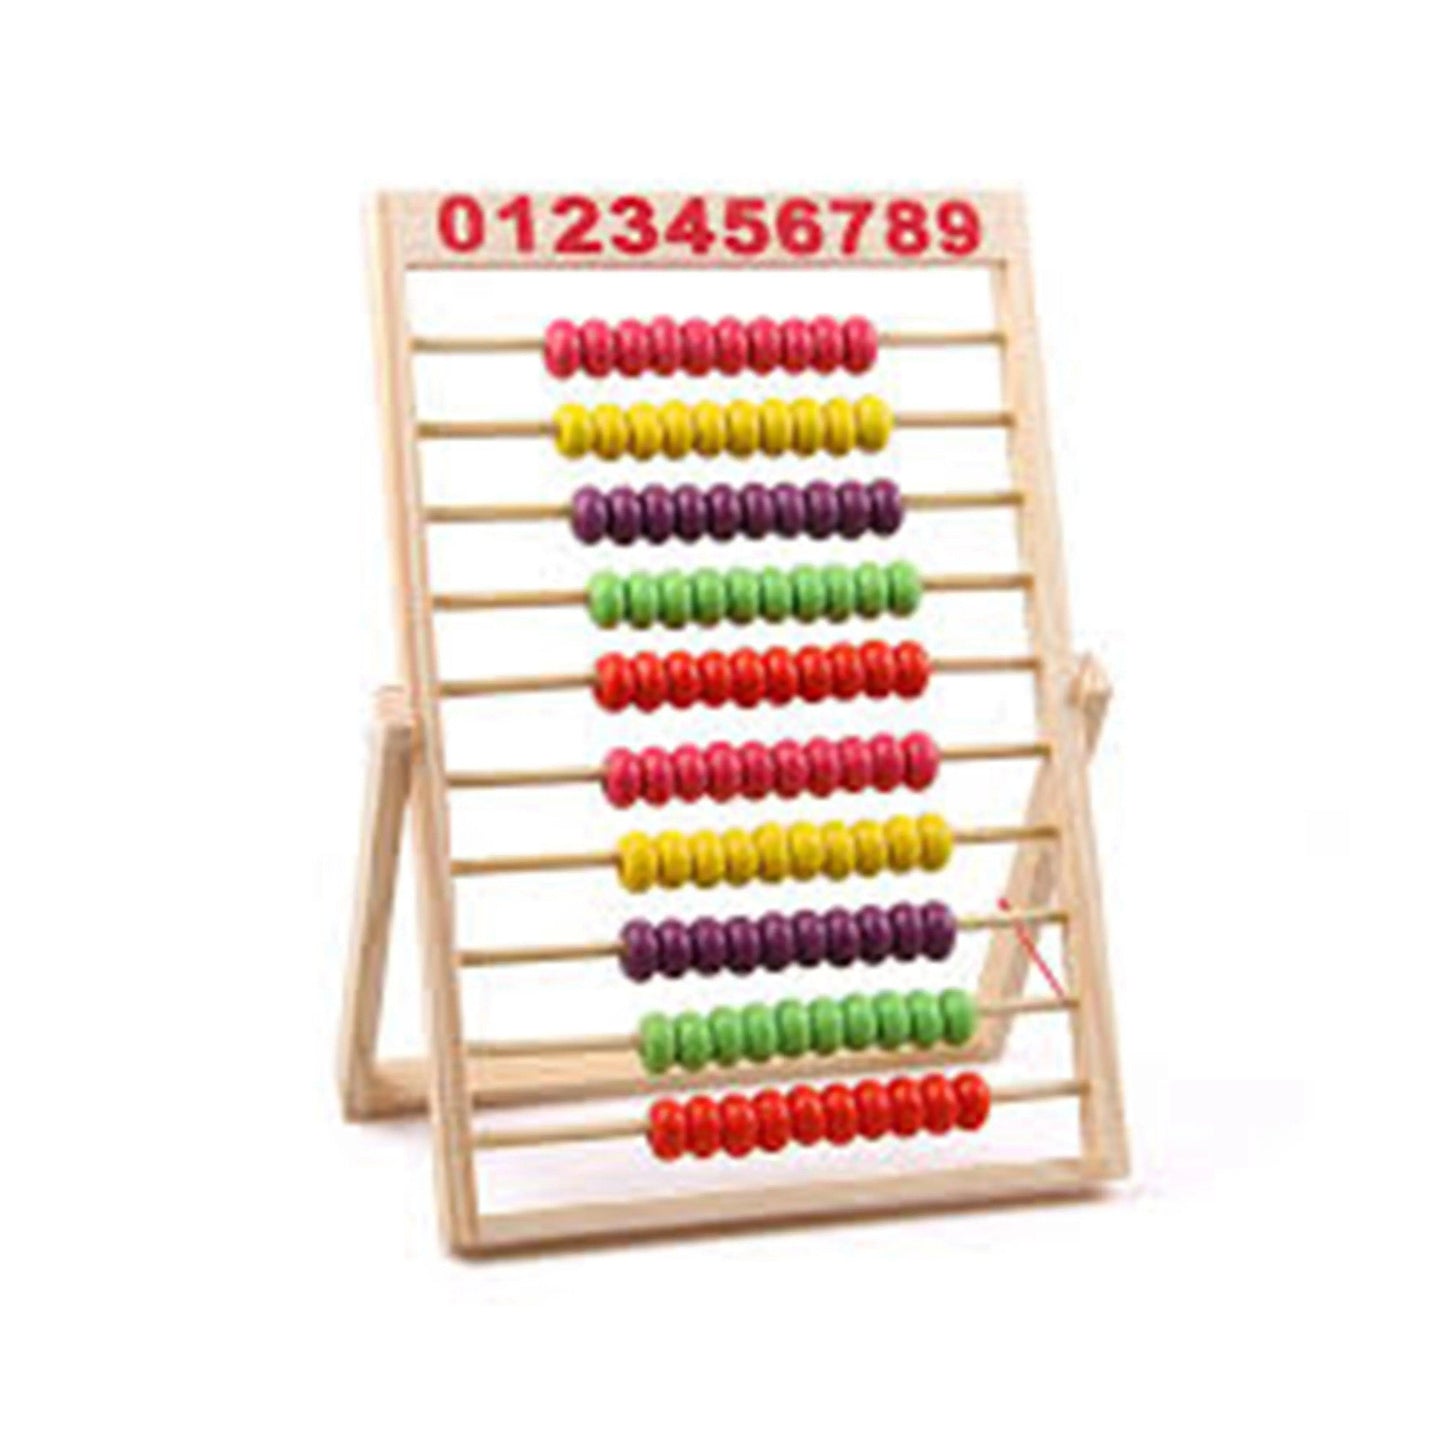 Buy Numbering Abacus Spike Abacus Online The Stationers